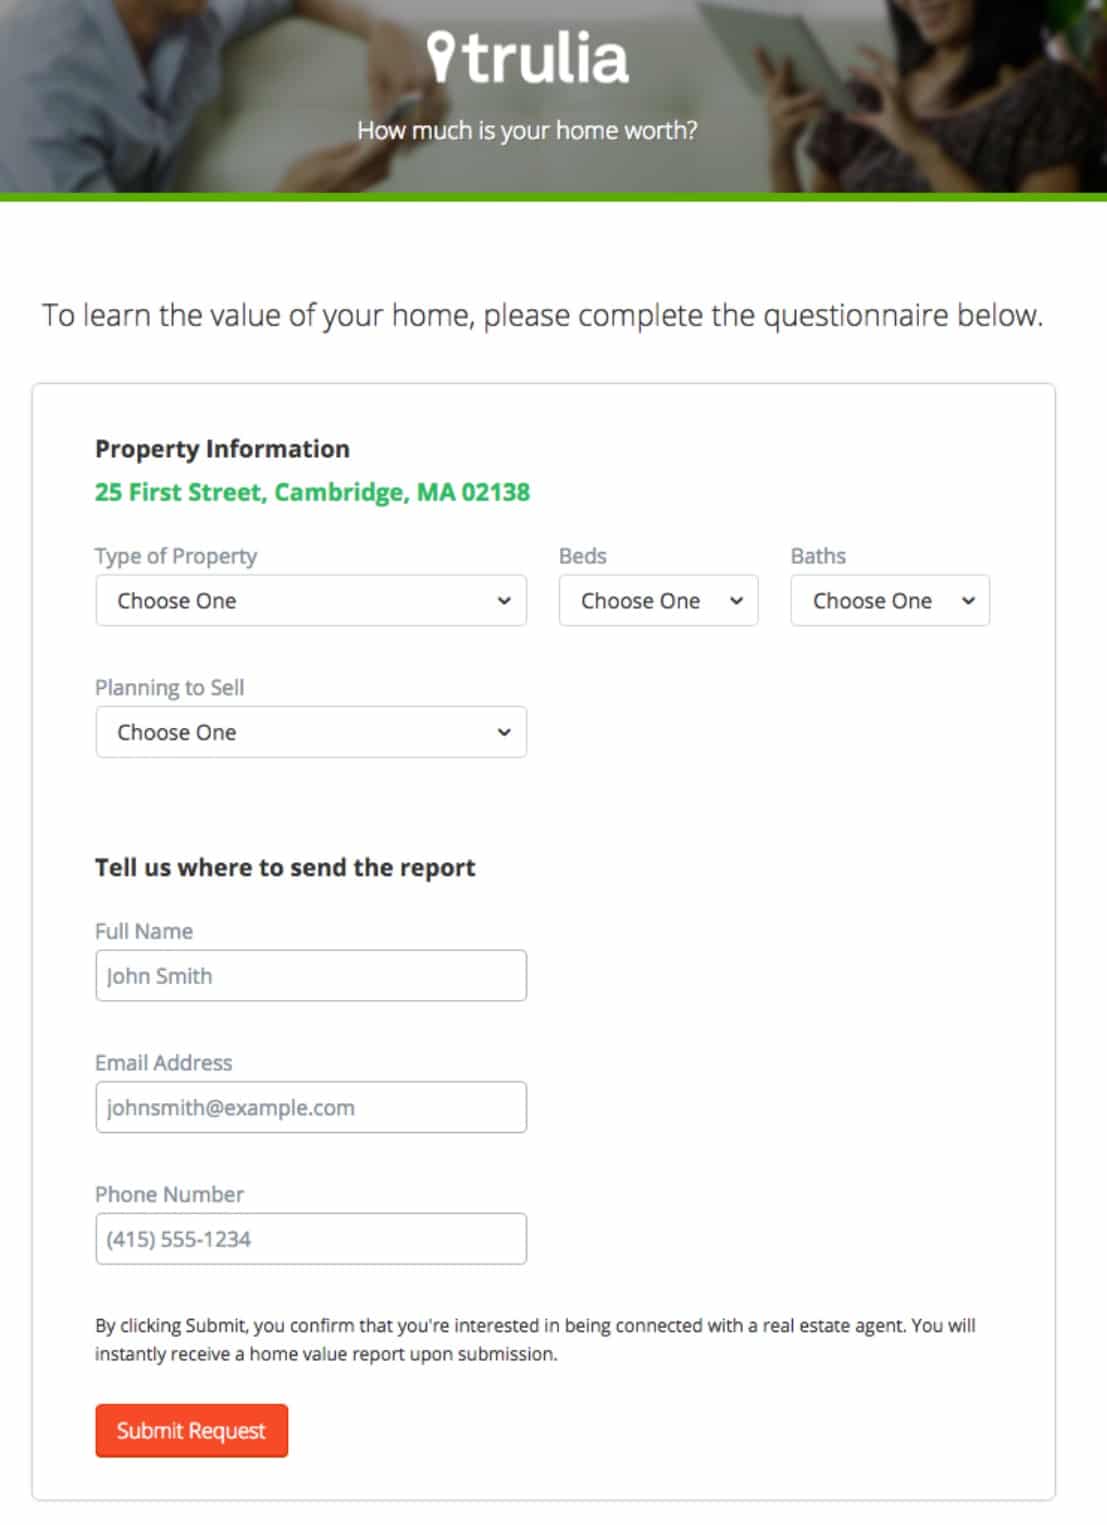 After the user enters their address, another prompt comes up that will ask for further information that can be used to add to the brand’s prospect list.